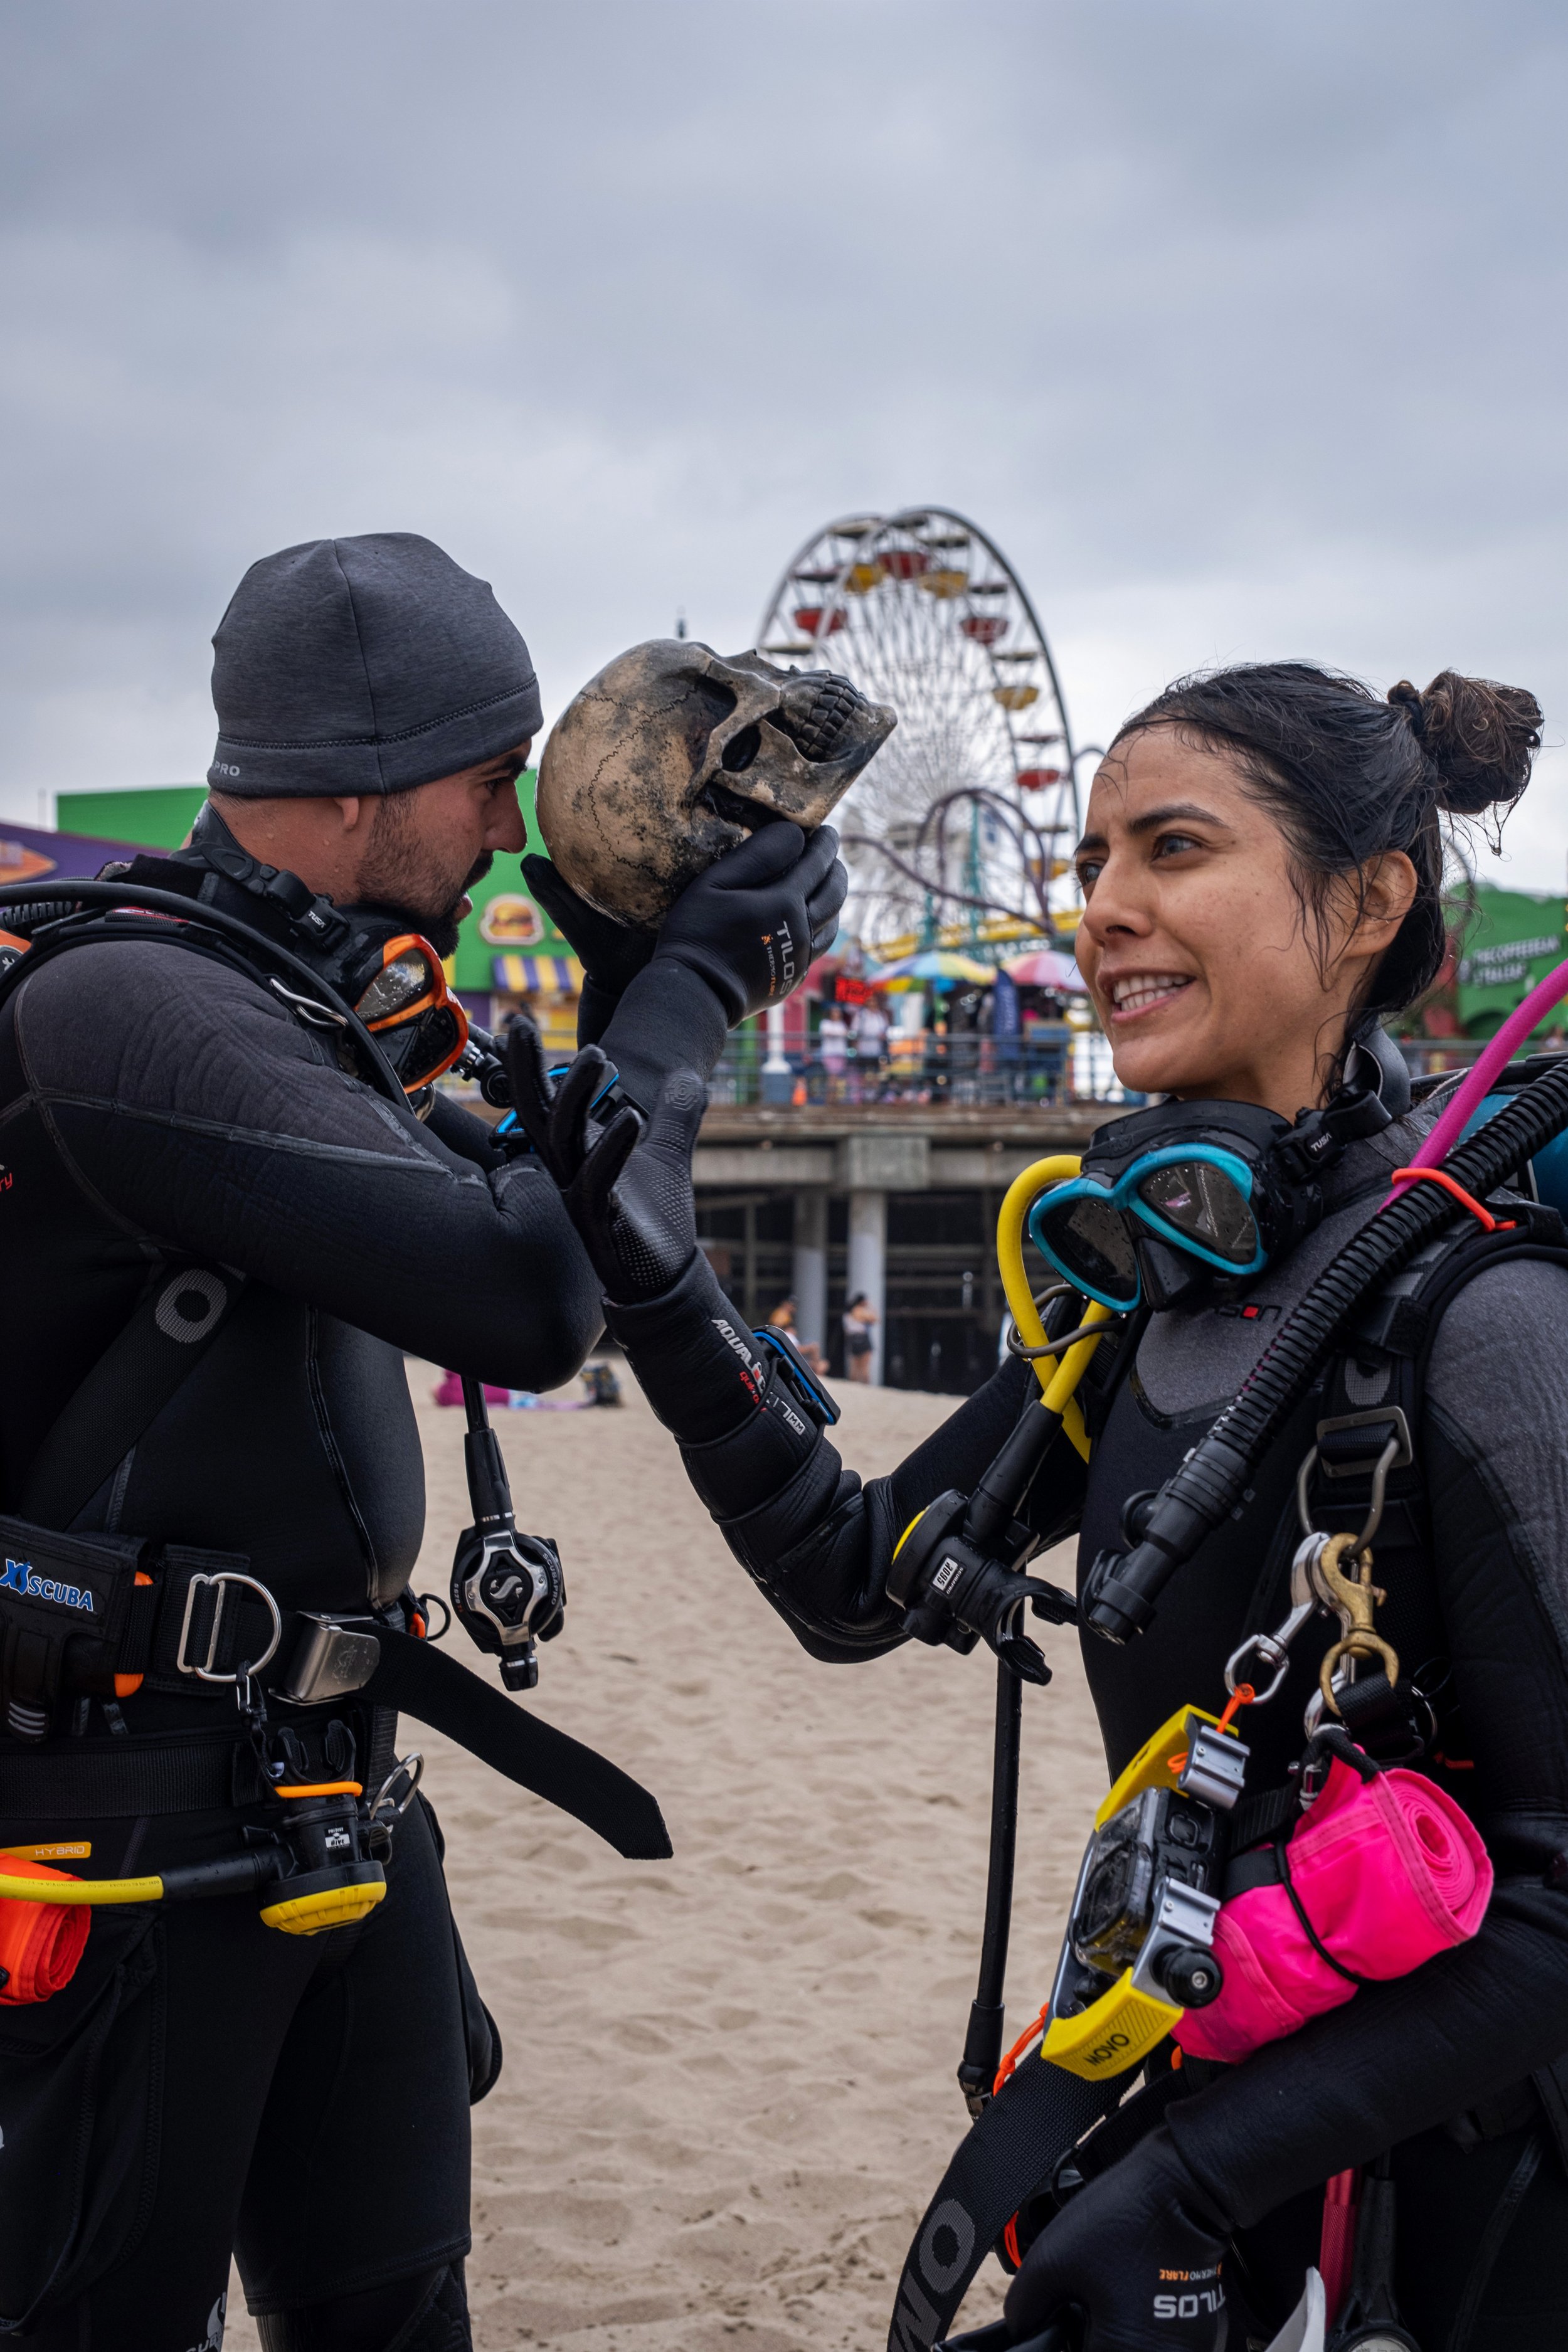  Alvin Alvarez (left) looks into the hole in the top of the skull that he collected while diving with Alma Alvarez (right) in the water surrounding the Santa Monica Pier for Coastal Cleanup Day, led by Heal The Bay in Santa Monica Calif. on Saturday,